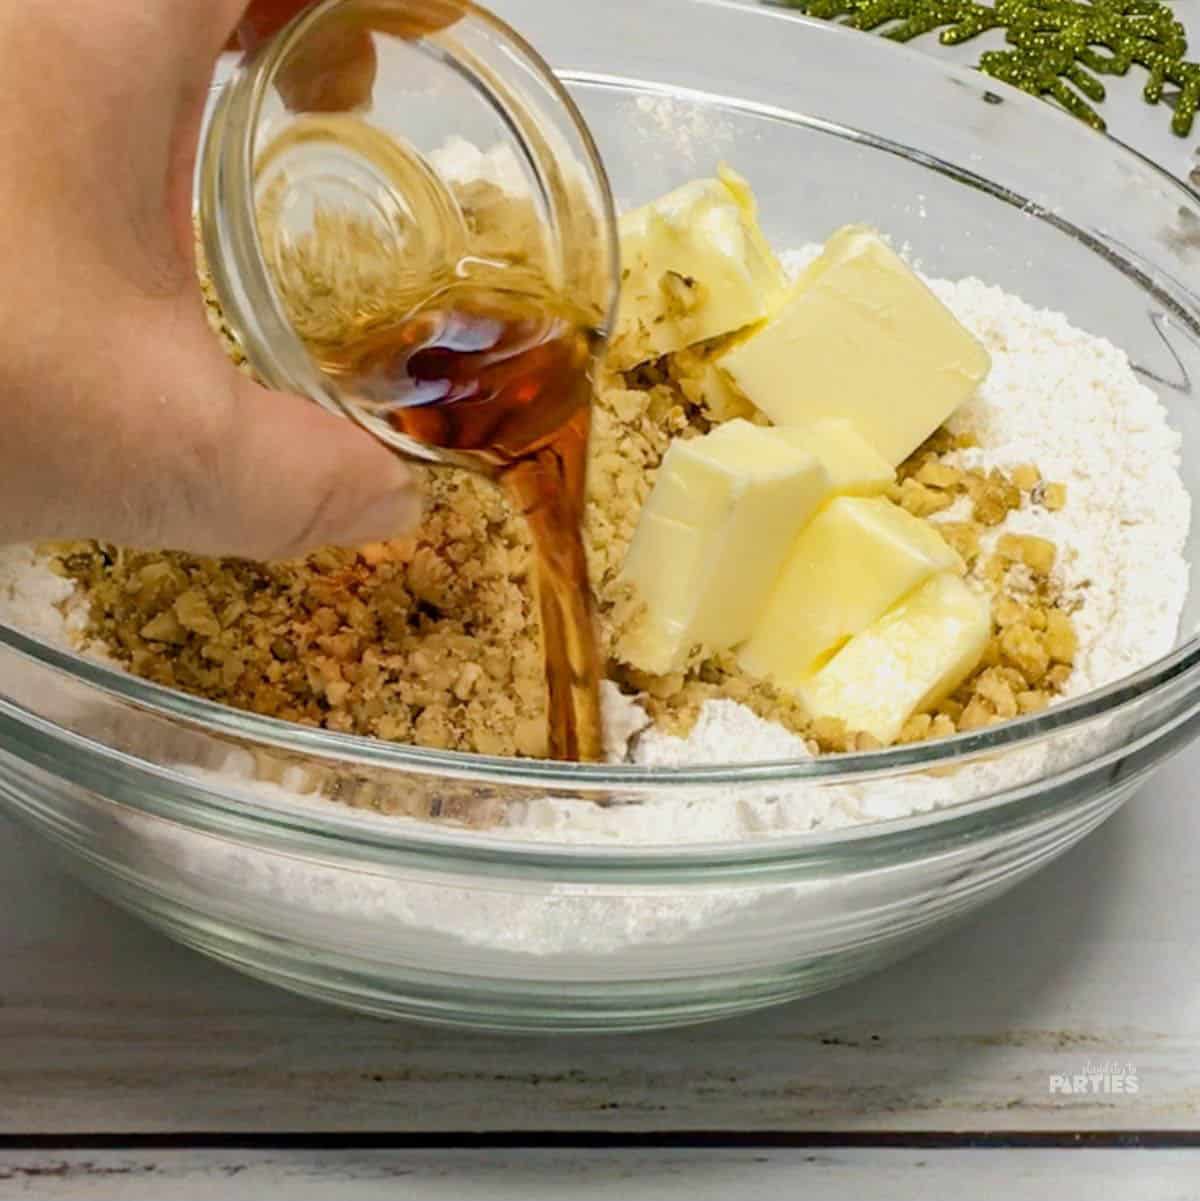 Combining sugar, walnuts, butter, and extract.